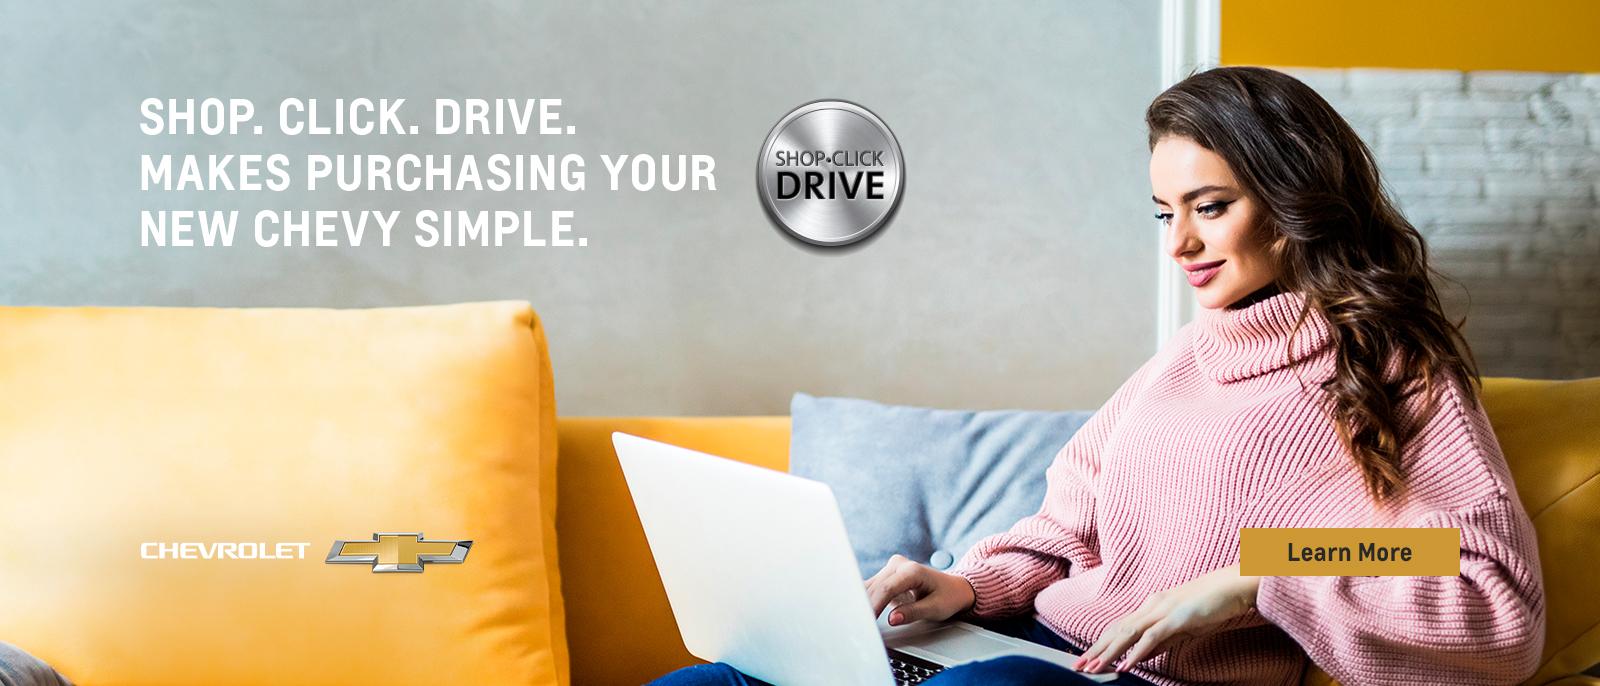 Shop. Click. Drive. Makes purchasing your new Chevy simple.